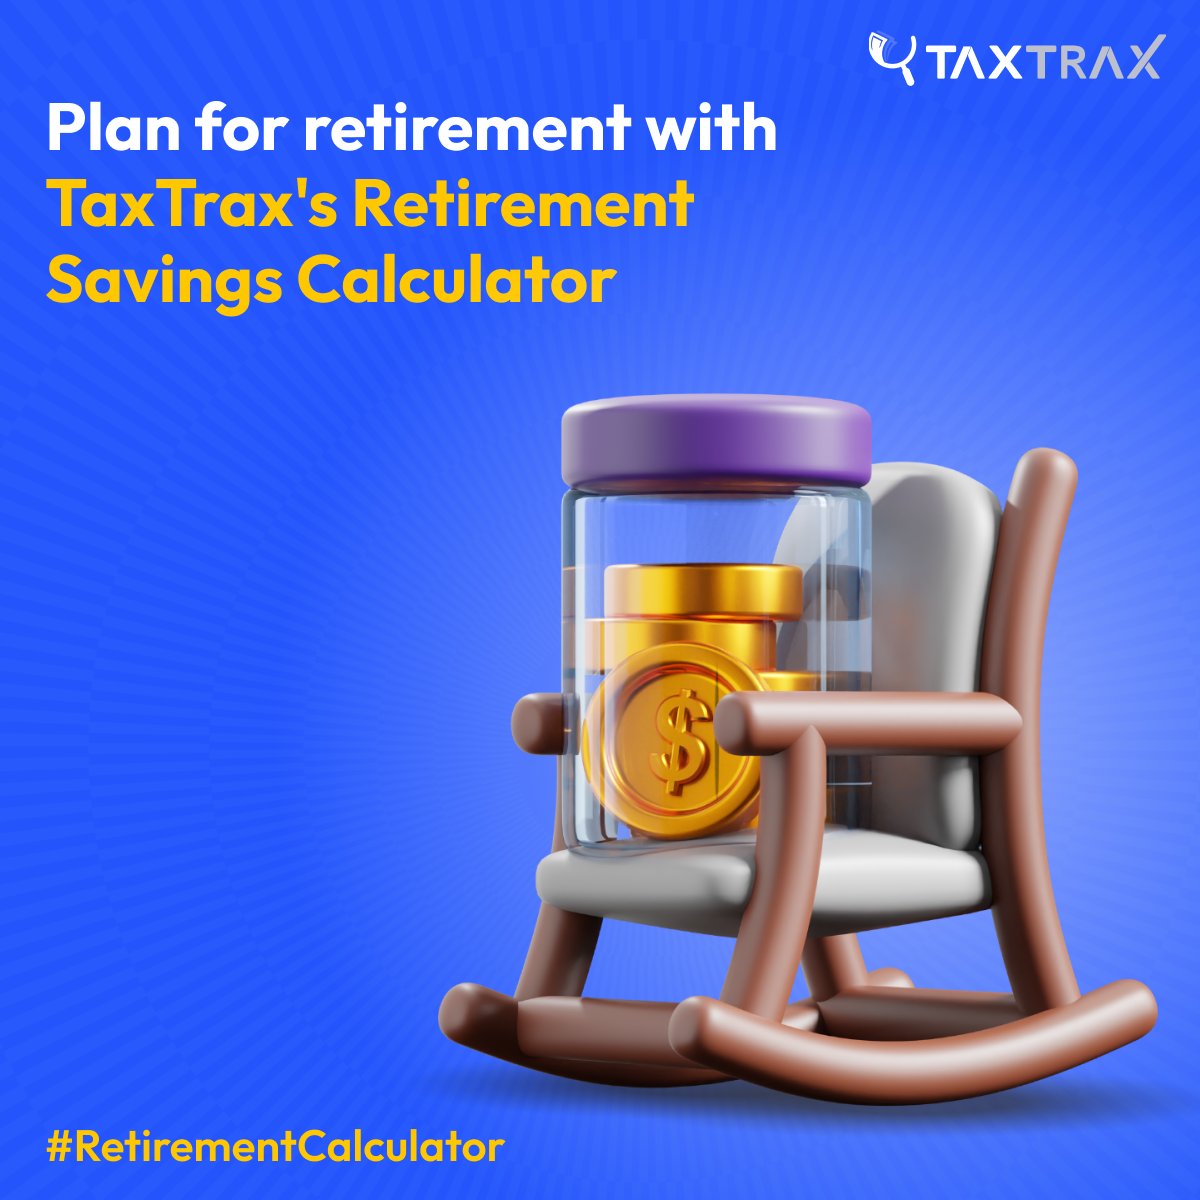 Plan for retirement with TaxTrax's Retirement Savings Calculator
#Retirementcalculator

Visit: tax-trax.com/retirement-cal…

#Tax #taxfiling #taxation #incometax #businesstax #business #calculator #aicalculator #taxcalculator